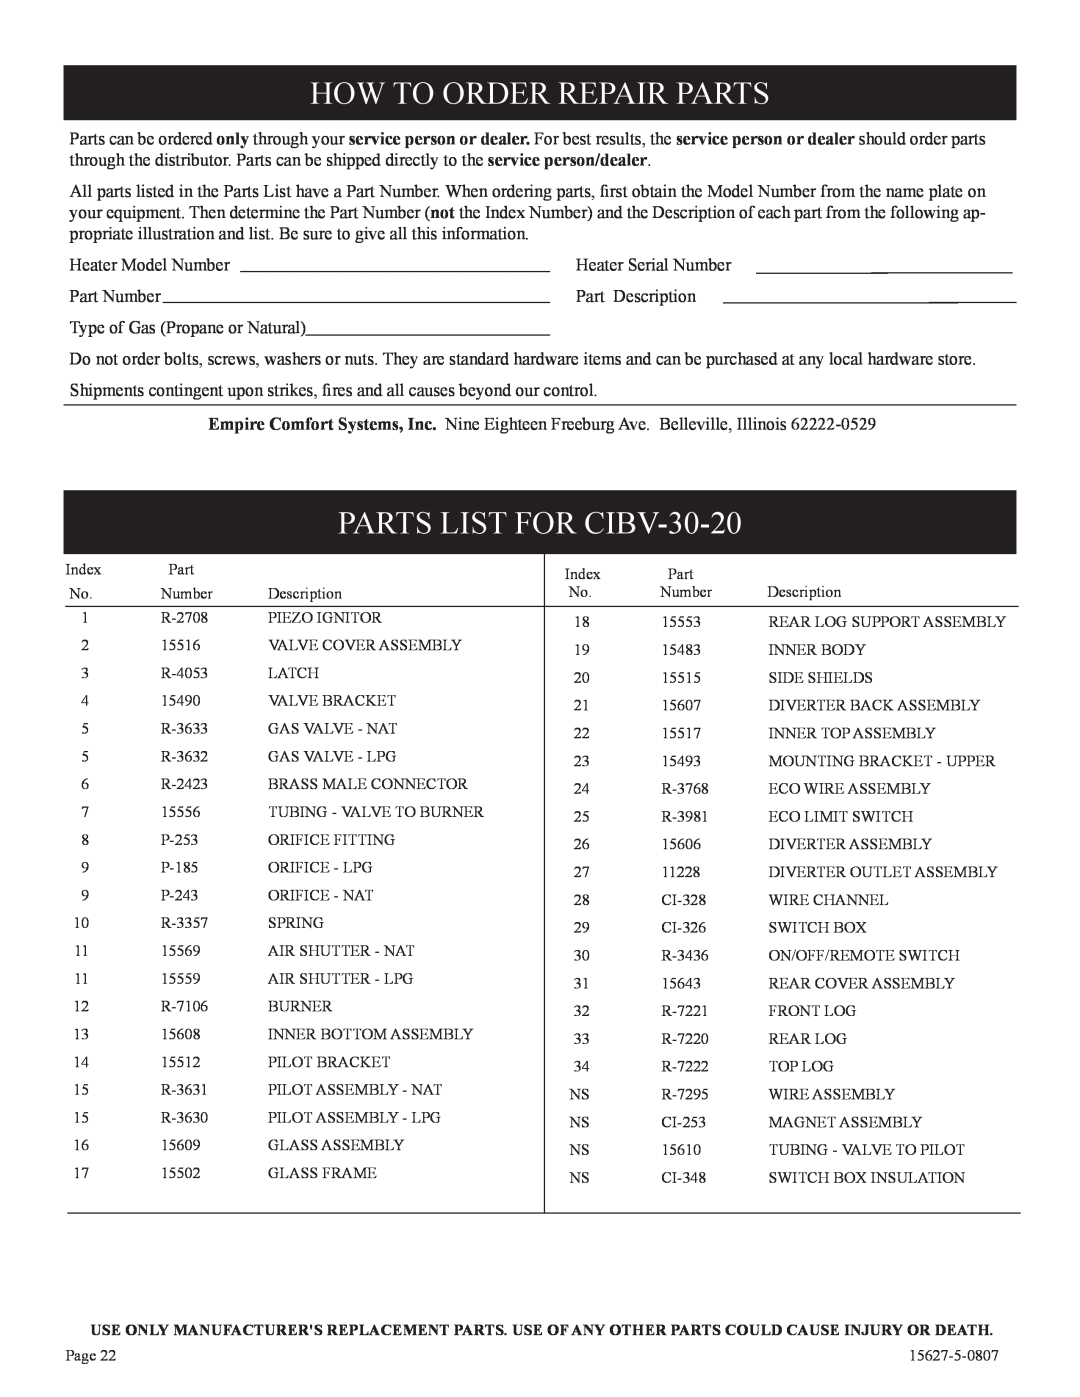 Empire Comfort Systems installation instructions How To Order Repair Parts, PARTS LIST FOR CIBV-30-20 